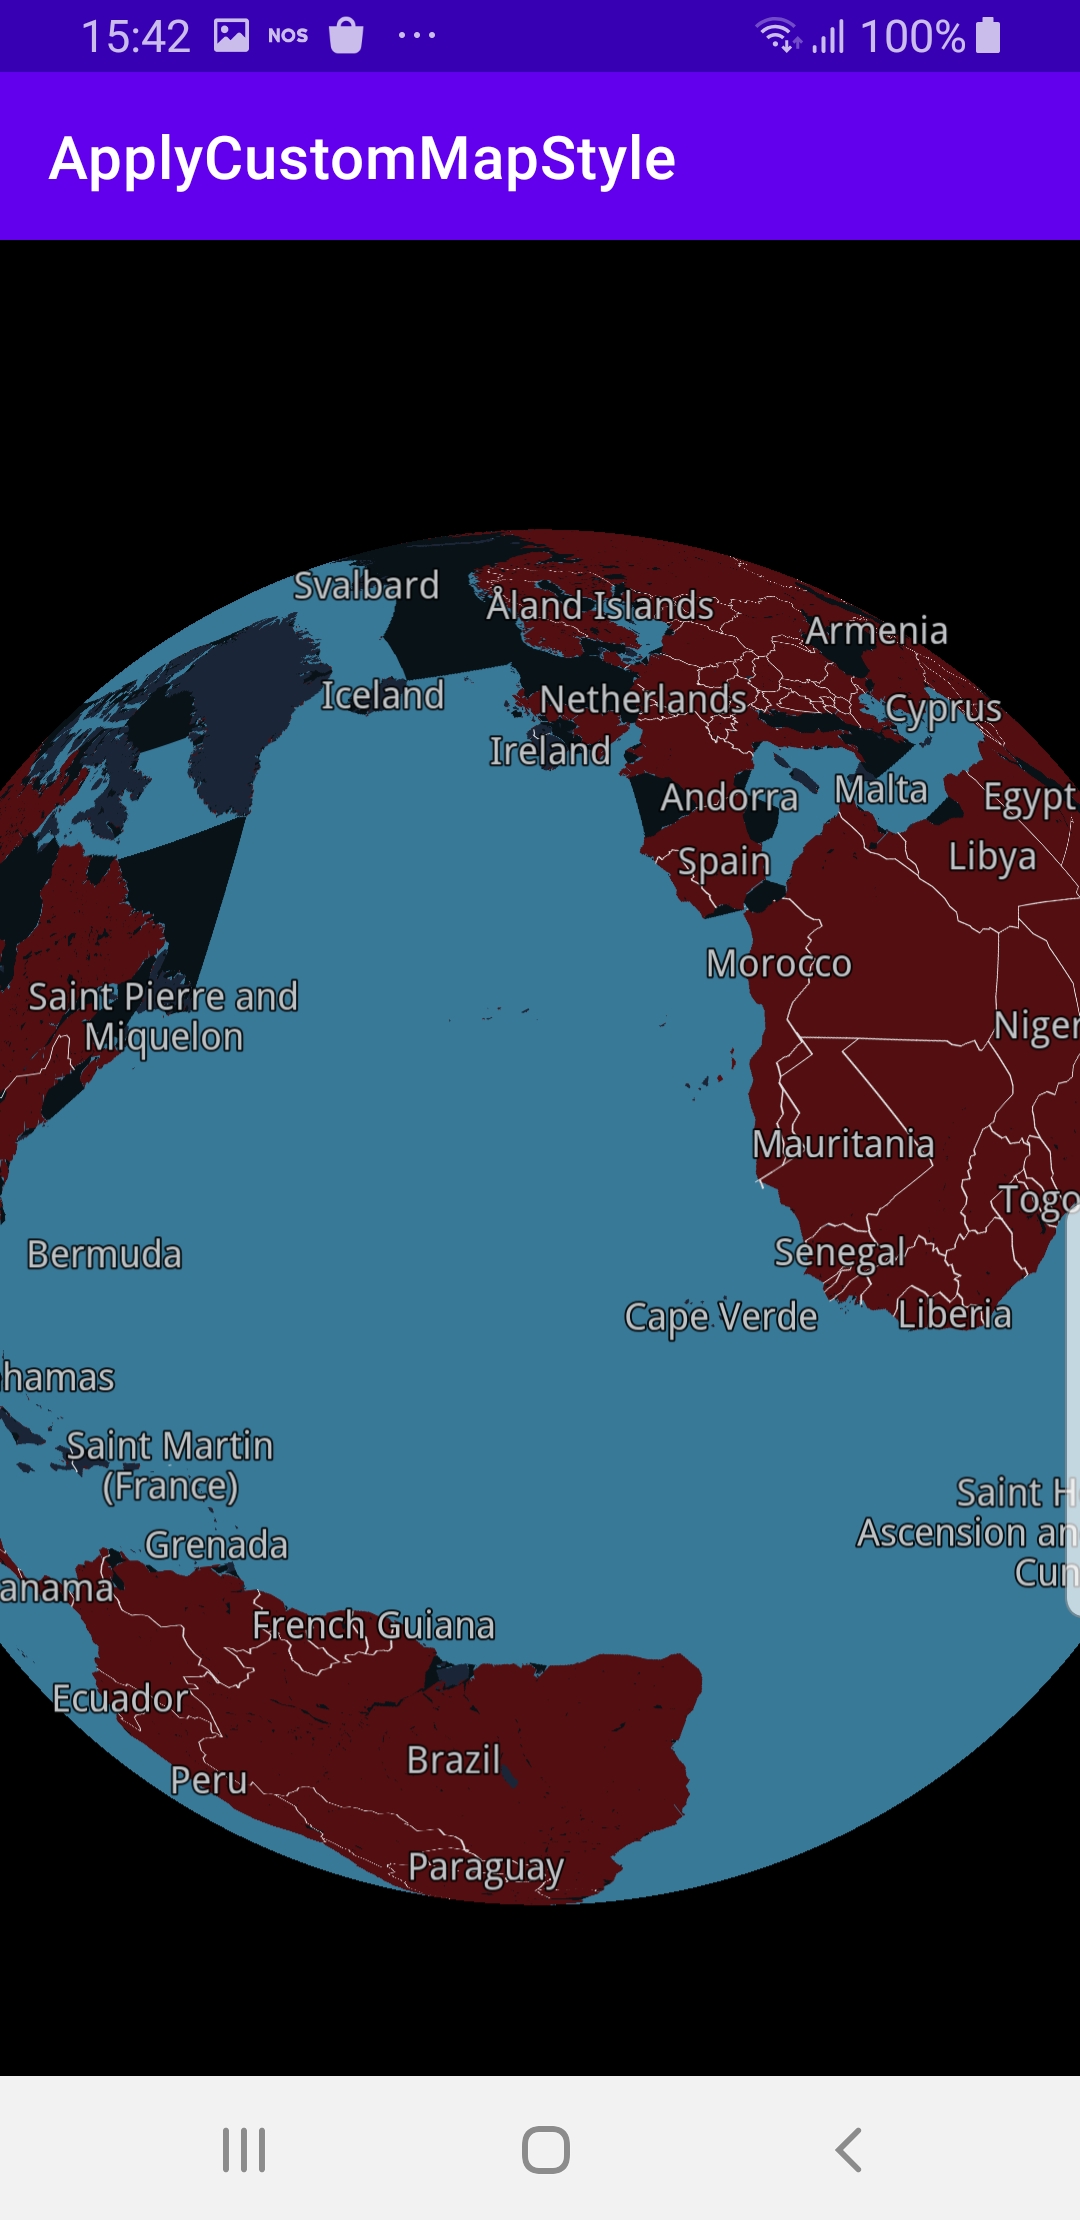 Apply custom map style example Android screenshot